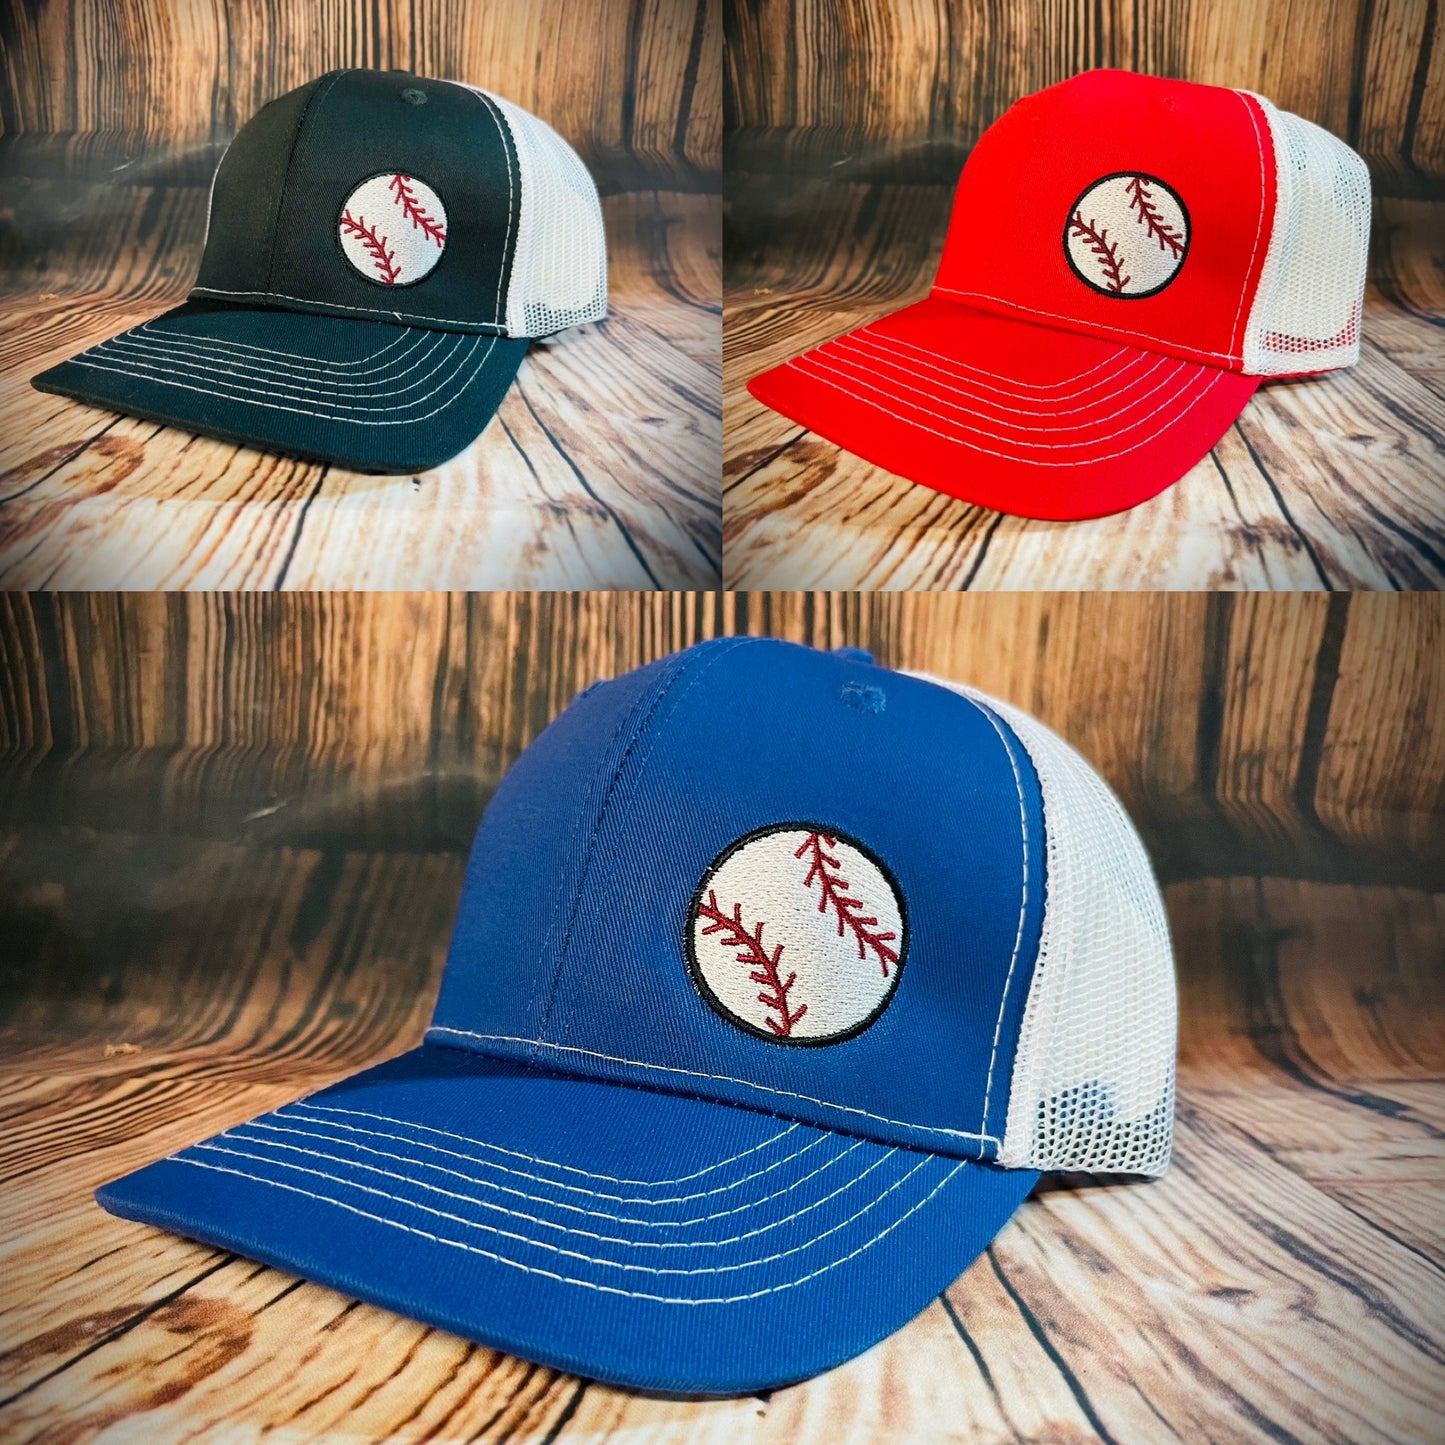 Embroidered Baseball hat